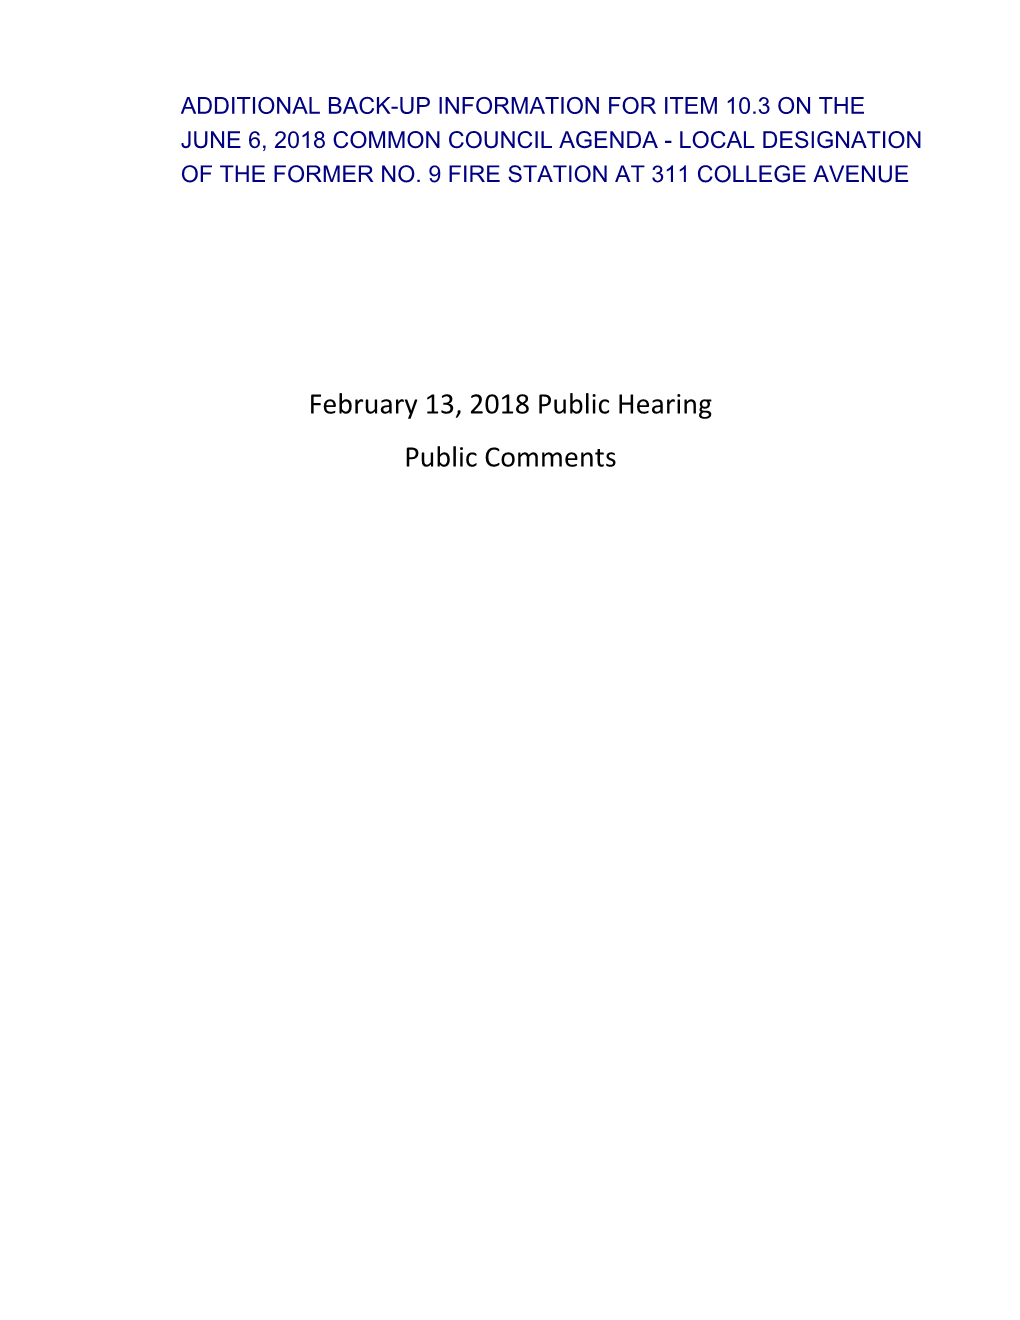 February 13, 2018 Public Hearing Public Comments # 9 Fire Station